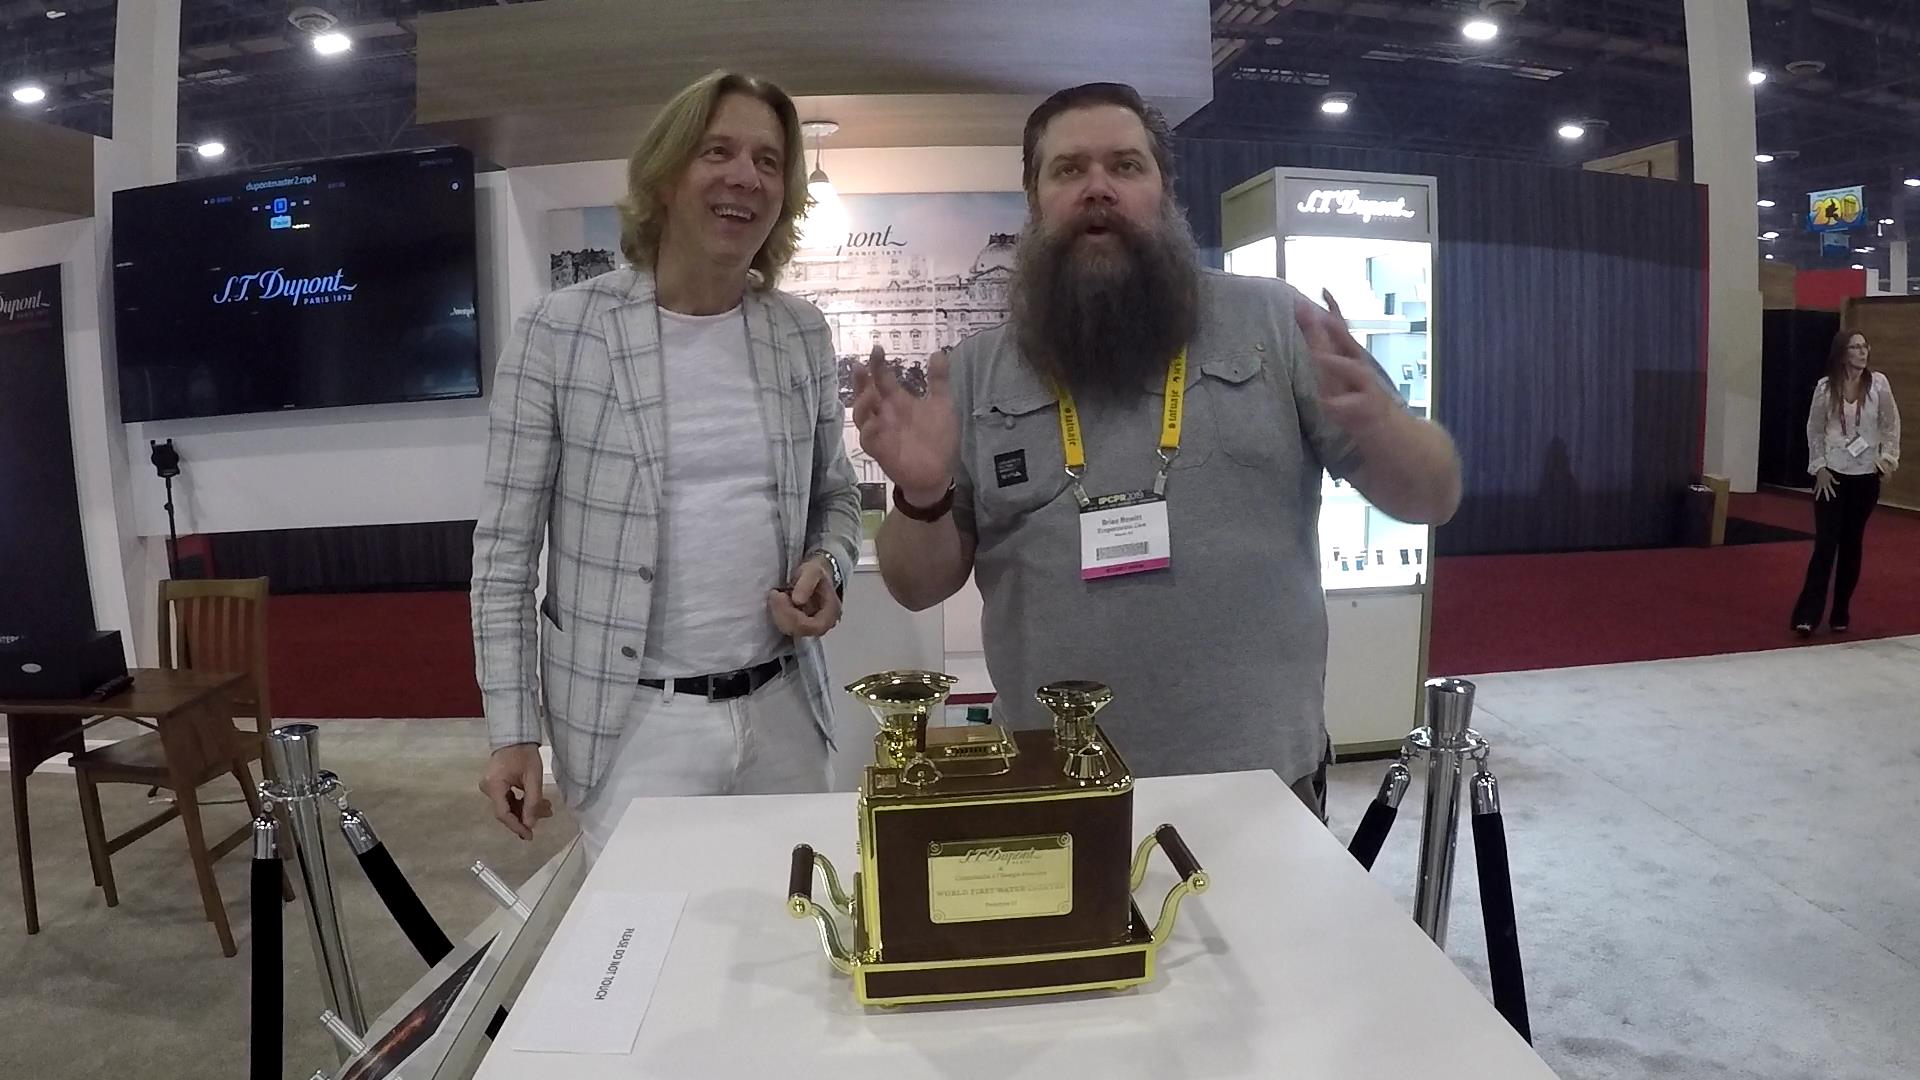 IPCPR 2019: S.T. Dupont